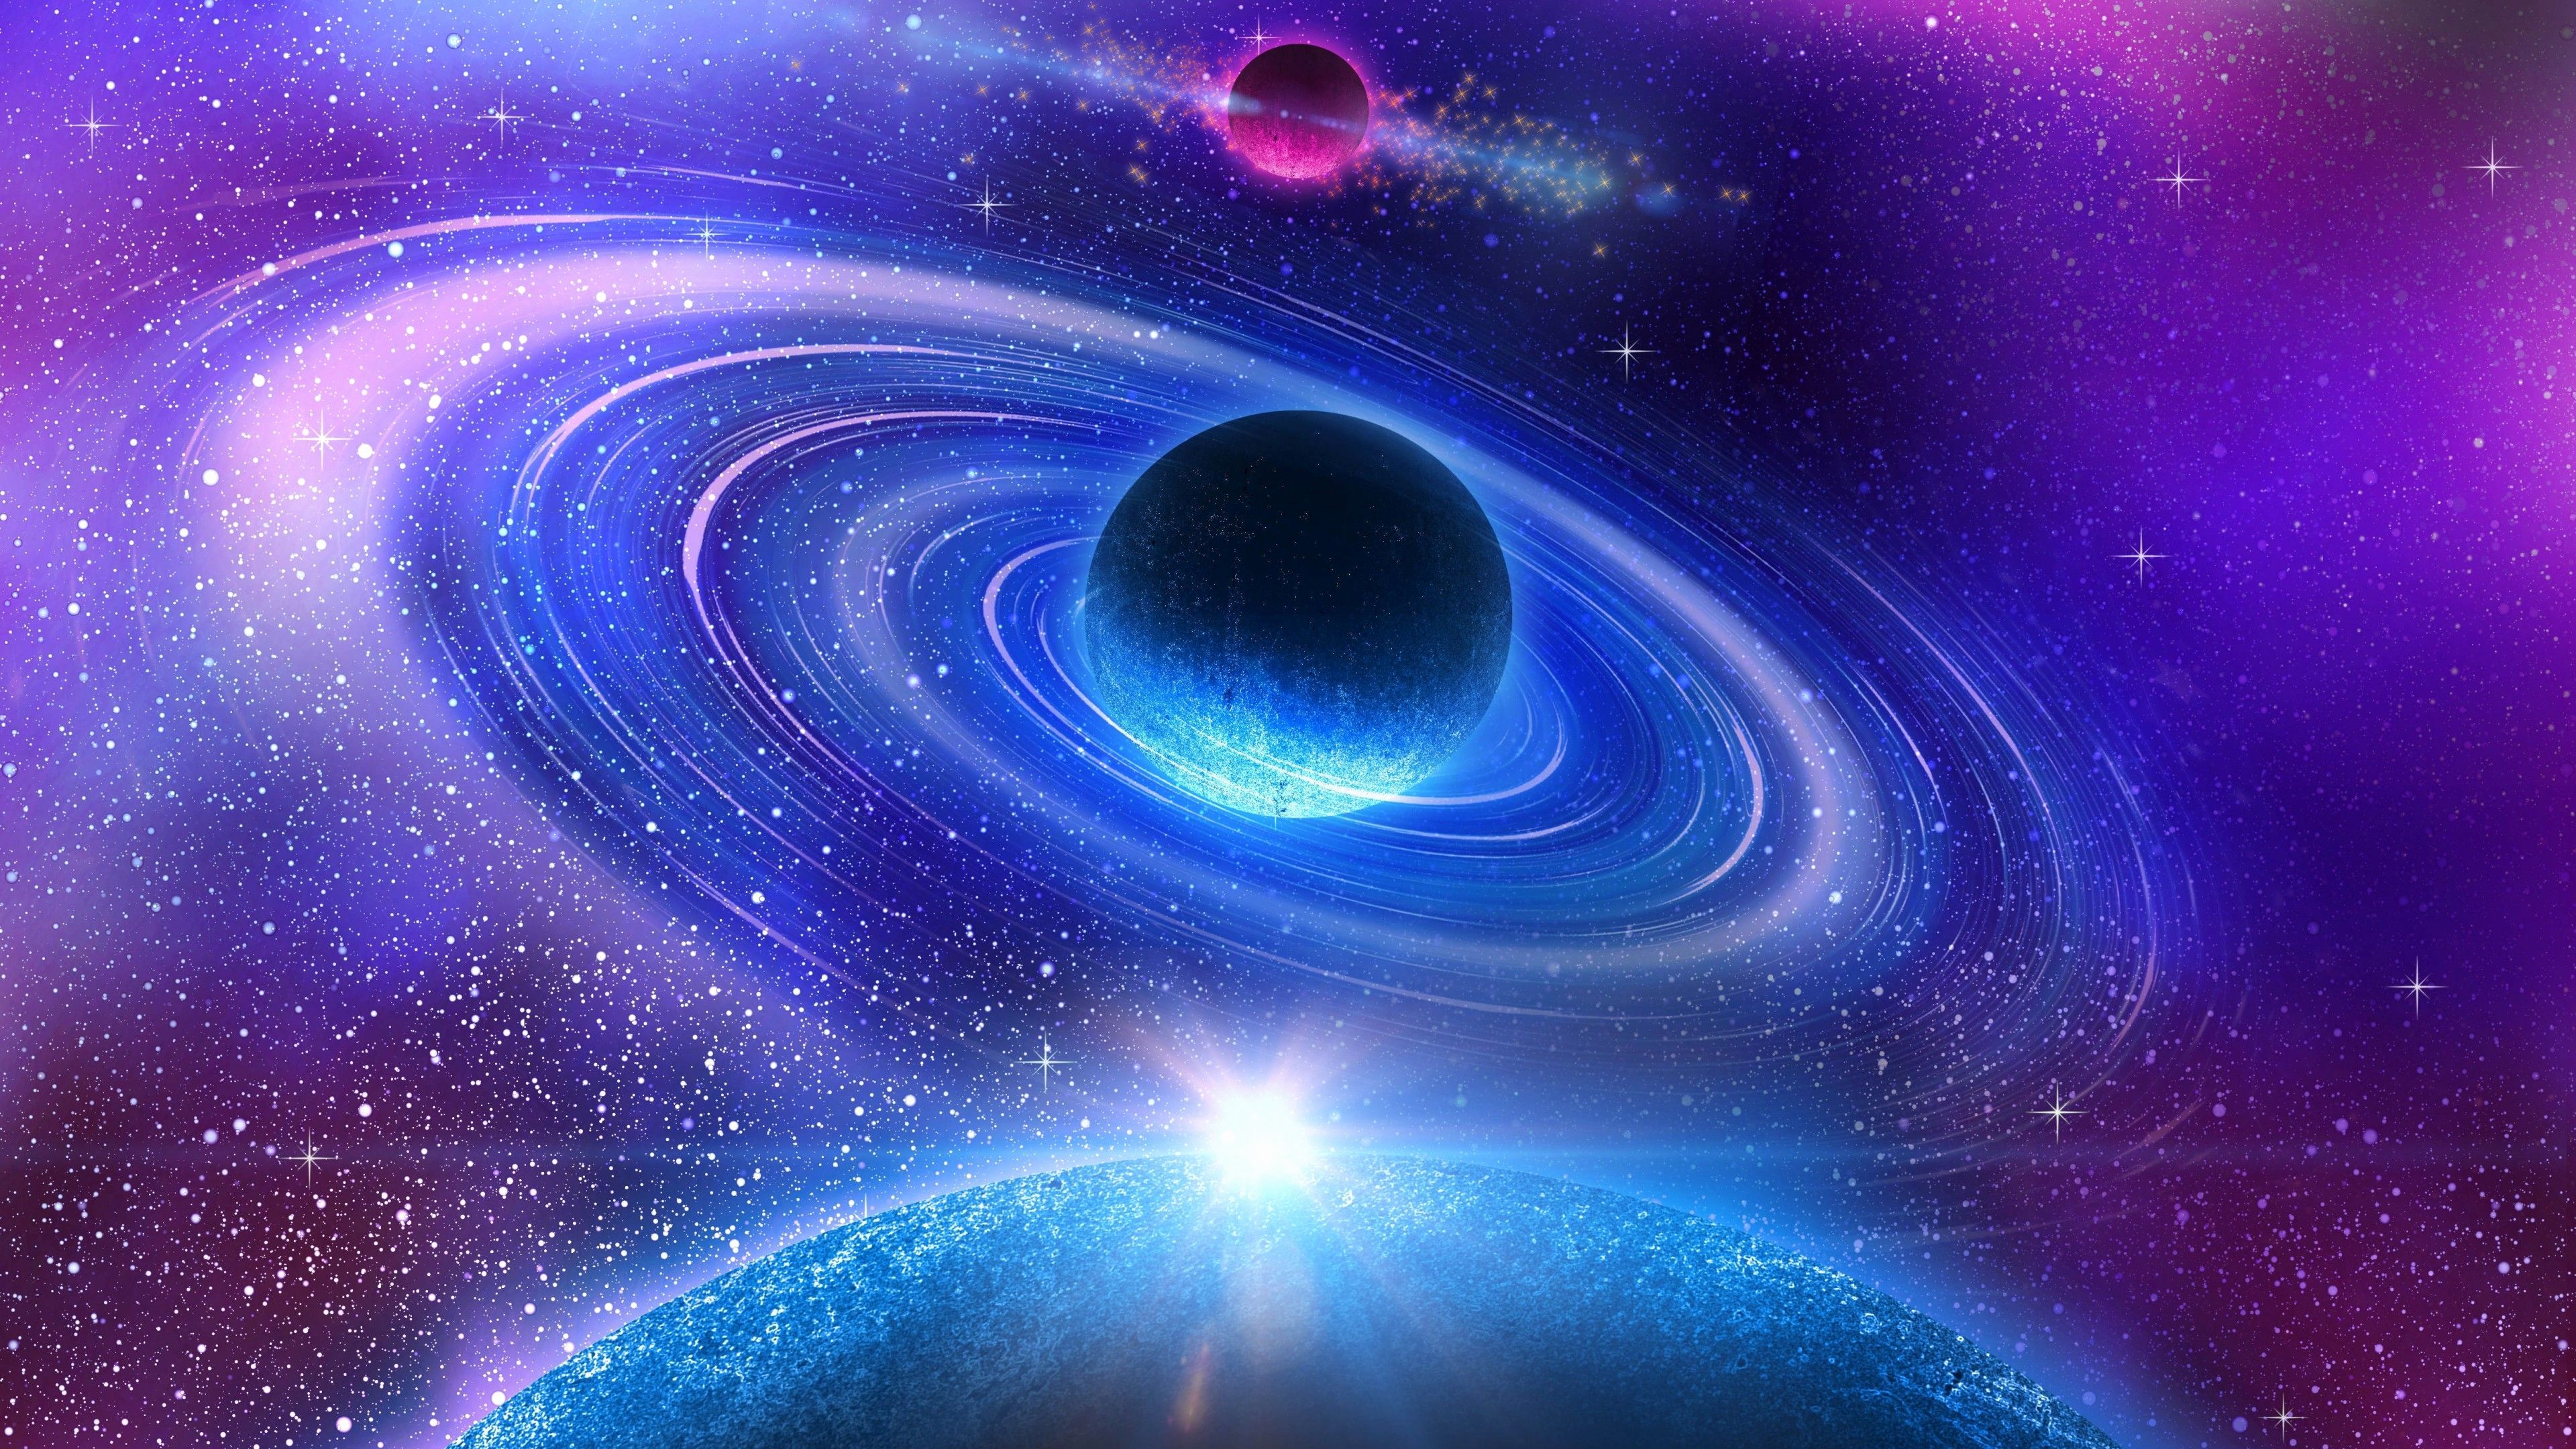 Outer Space Wallpaper Inspirational Trippy Space Wallpaper 3840×2160